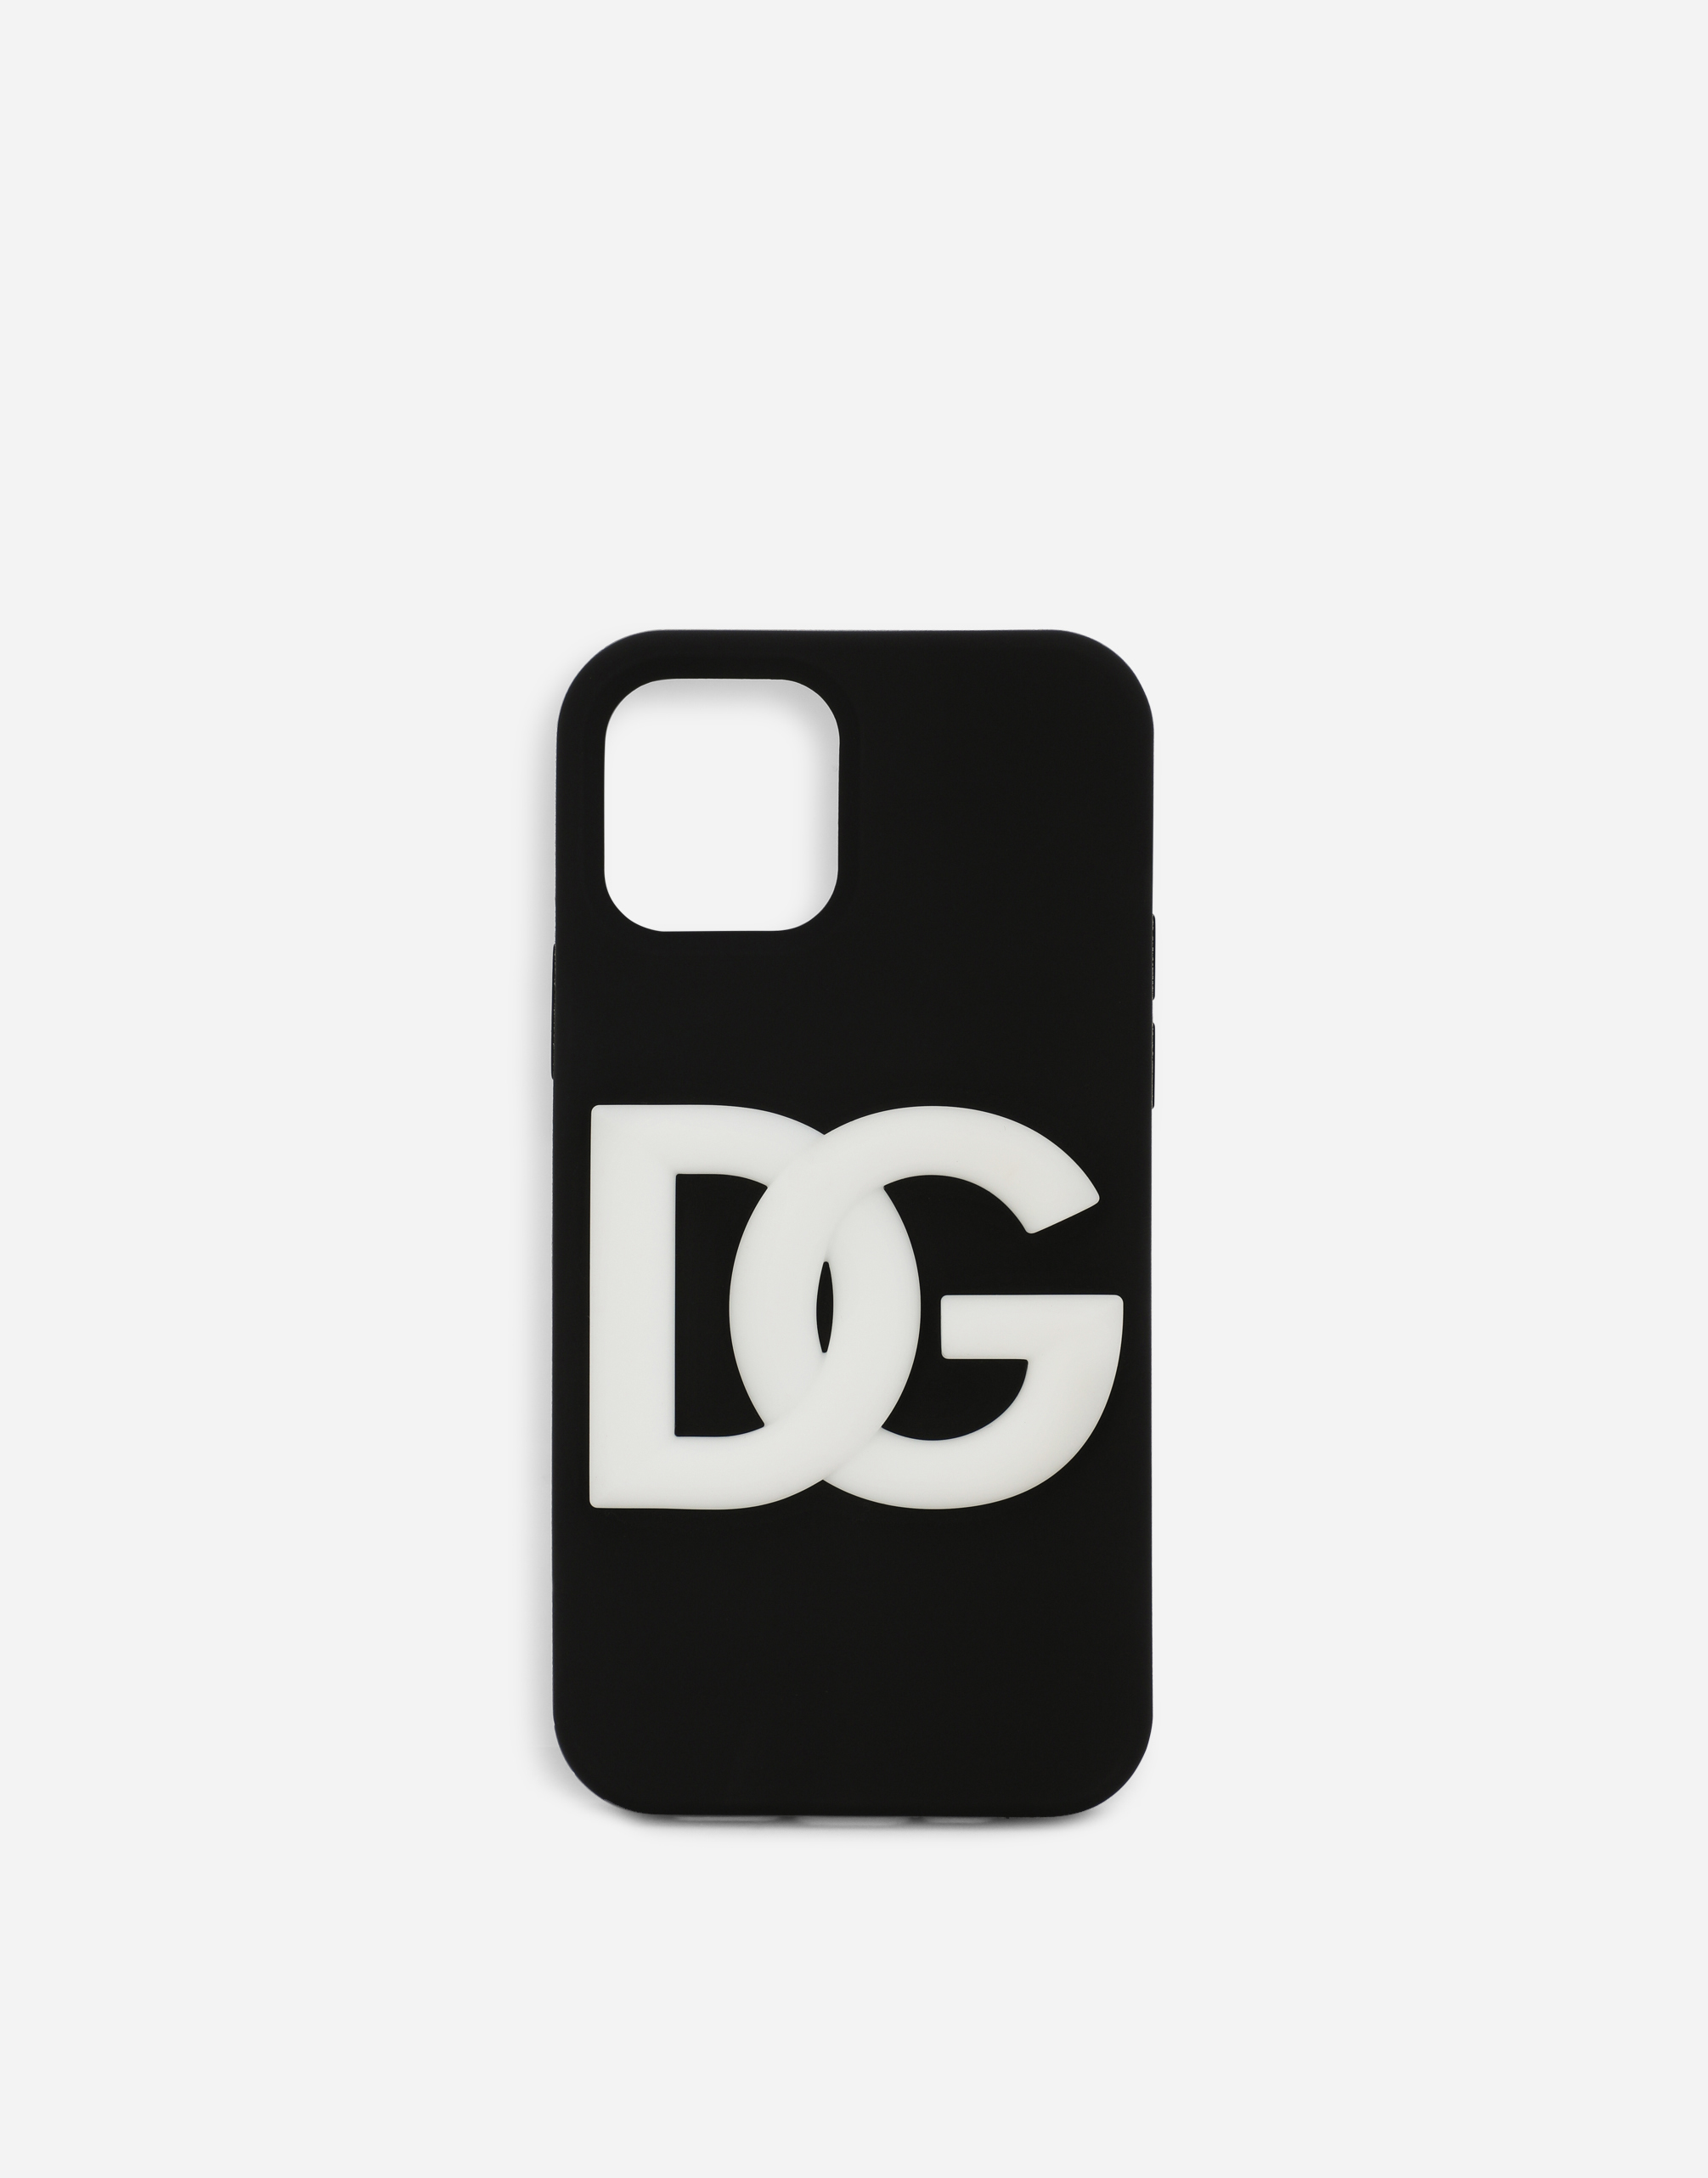 Rubber iPhone 12 Pro cover with DG logo in Multicolor